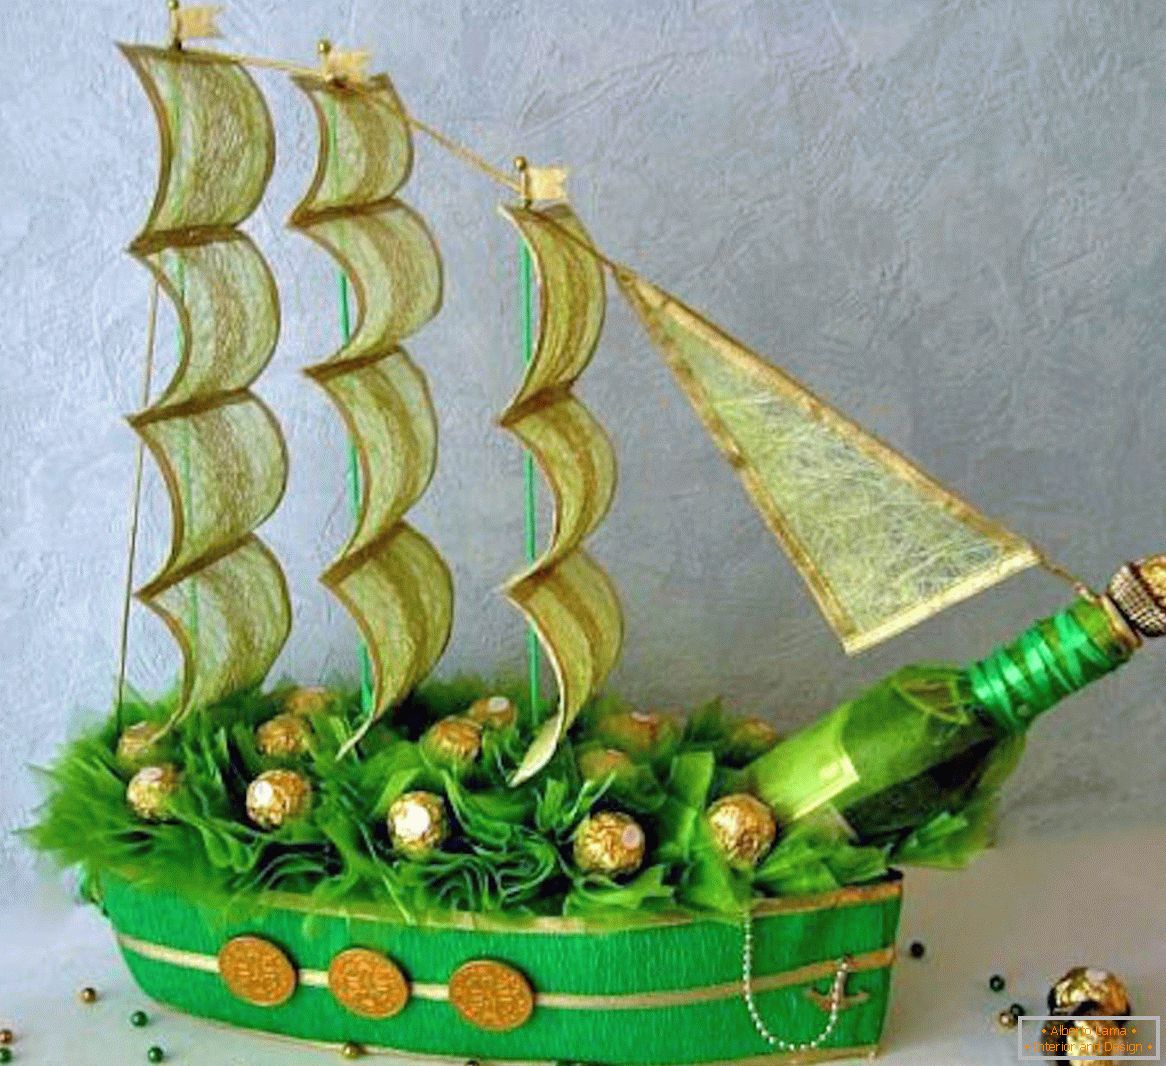 Ship of sweets